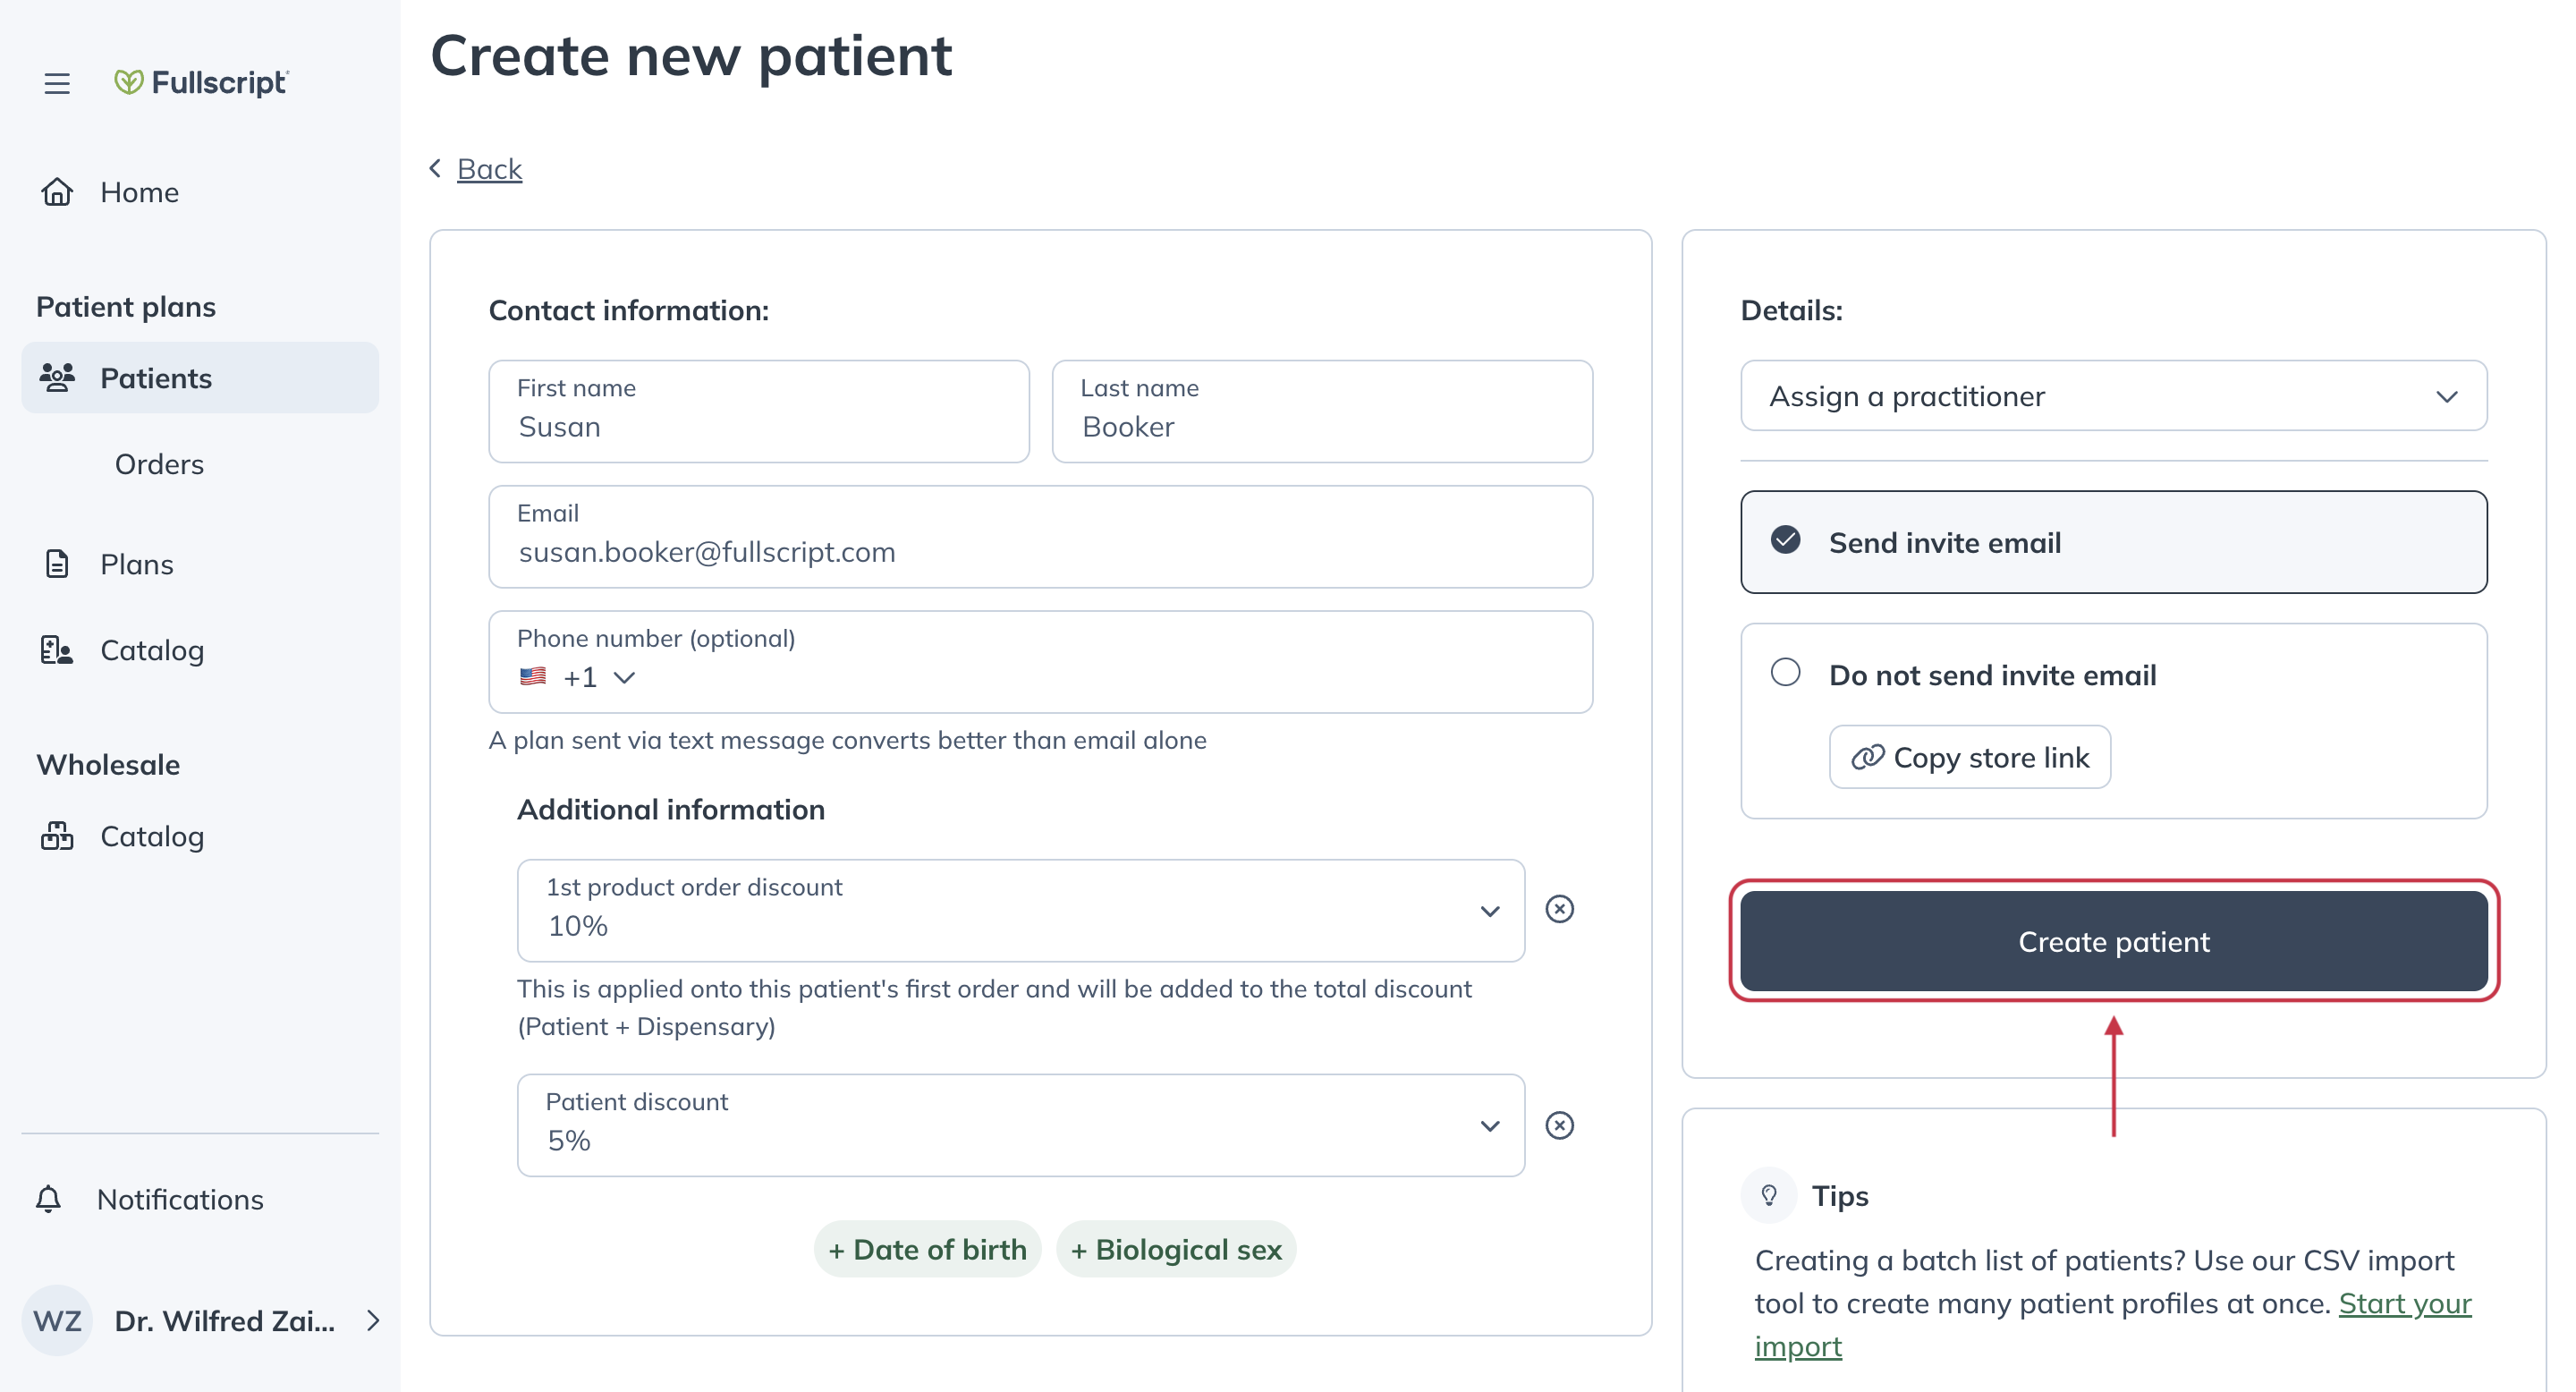 Adding a new patient from the Patients page.